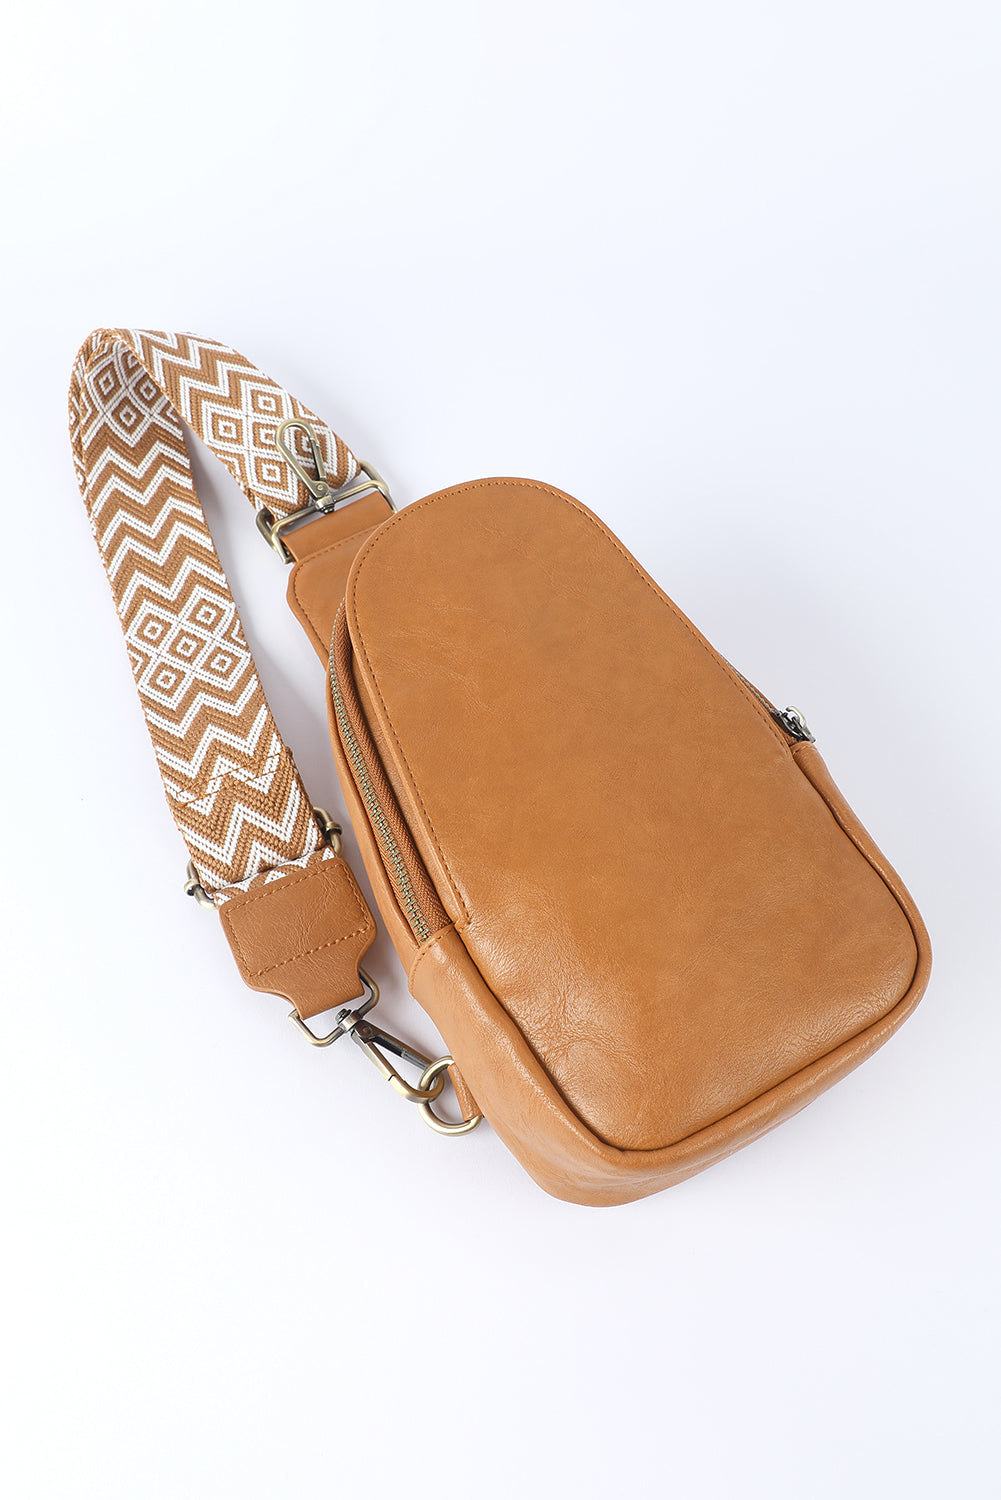 Camel sling bag with camel and white chevron adjustable strap